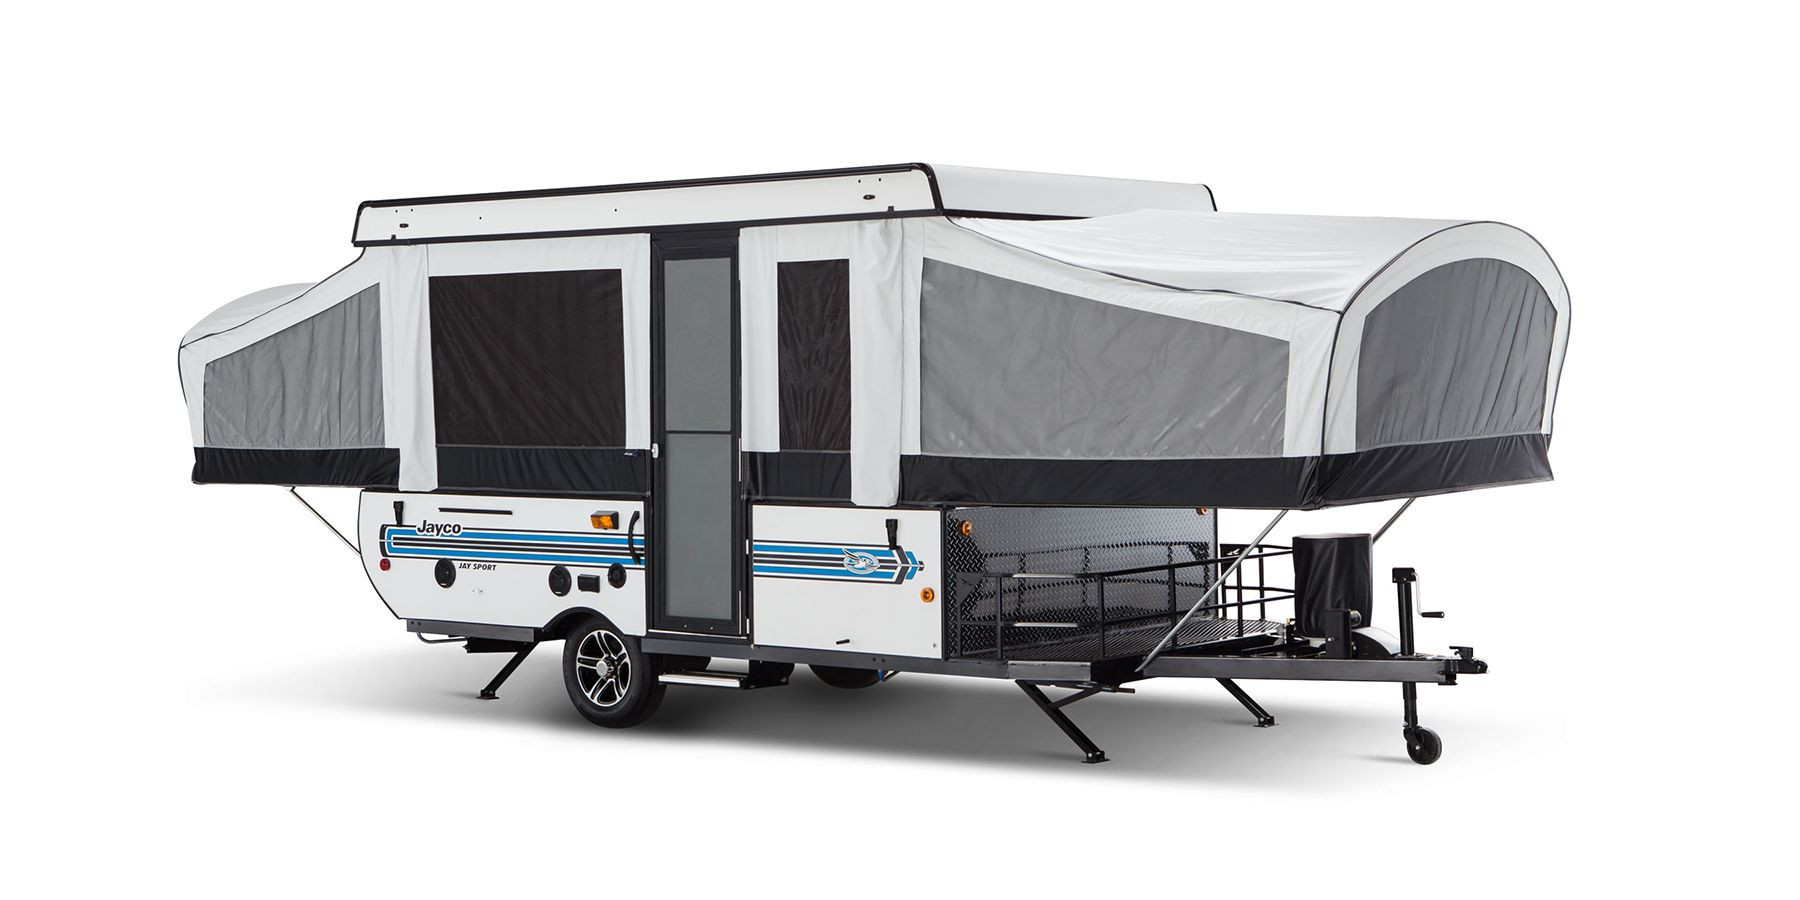 Small Rv Trailers With Bathroom
 7 Perfect Small Campers with Bathrooms When Nature Calls